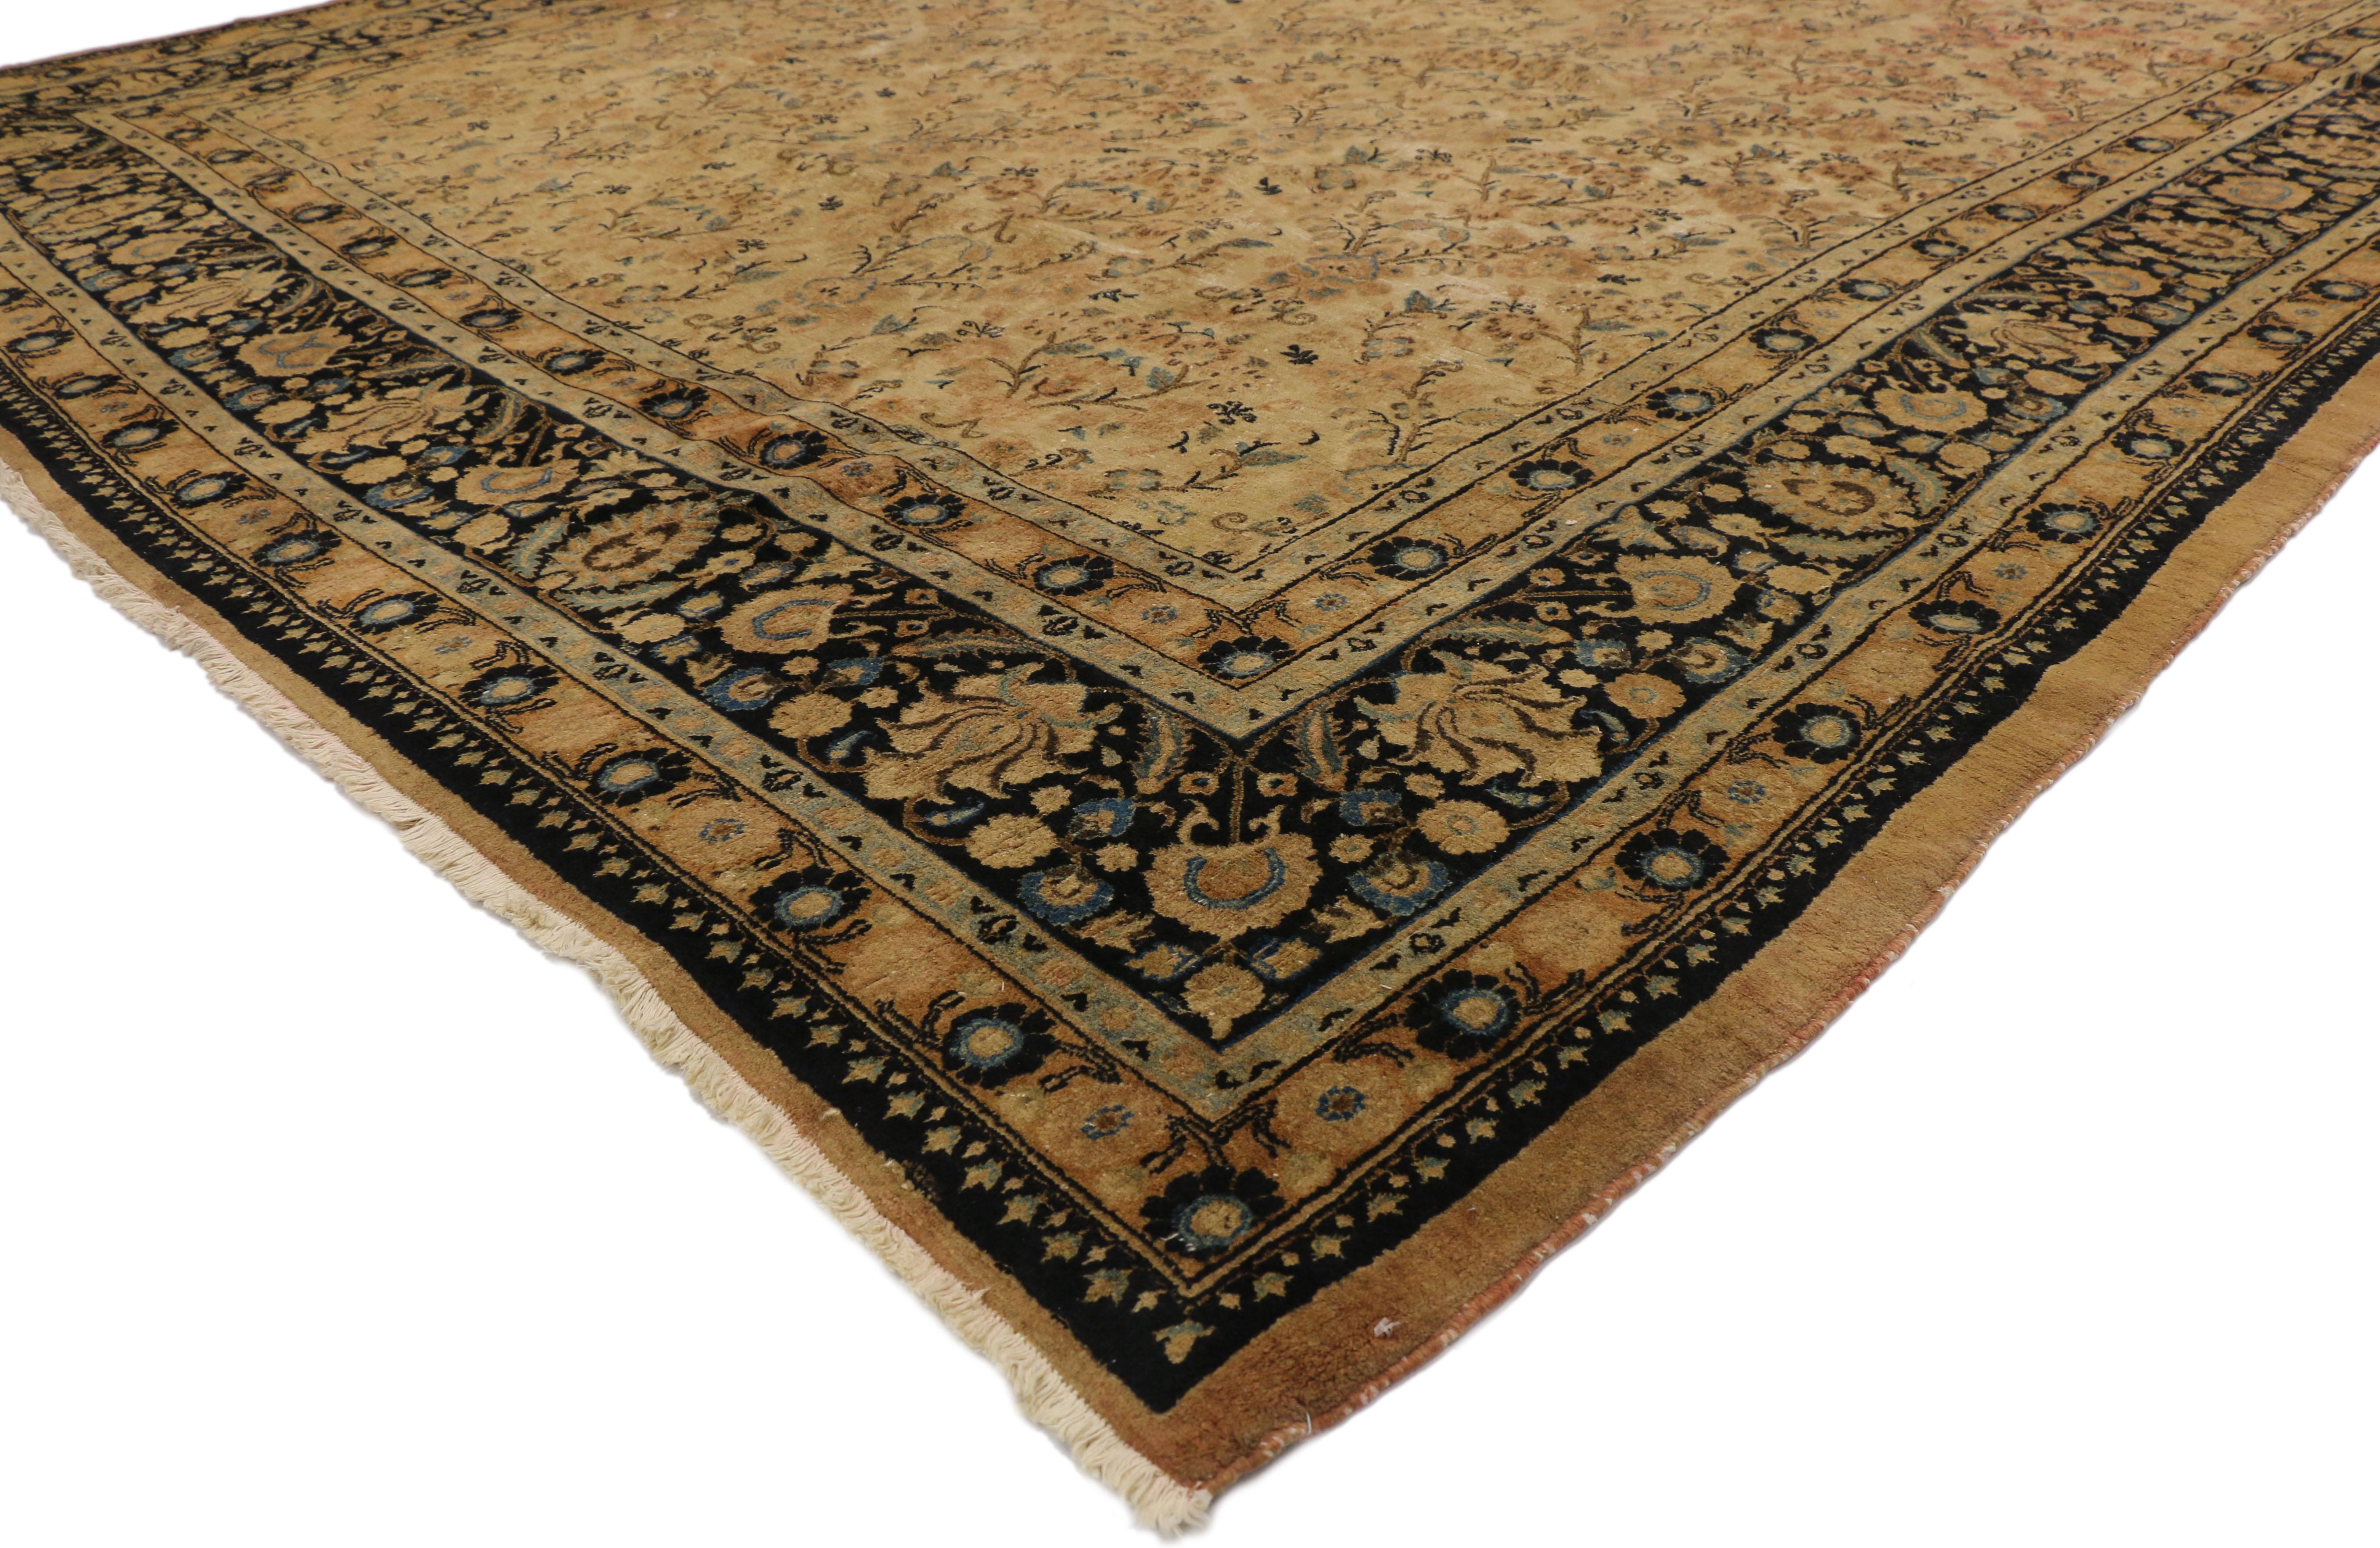 75596 antique Persian Mashhad rug with shabby chic Rustic European Cottage style. This hand knotted wool antique Persian Mashhad rug features a gorgeous all-over pattern of repeating floral sprays on a neutral abrashed field. A darker primary border